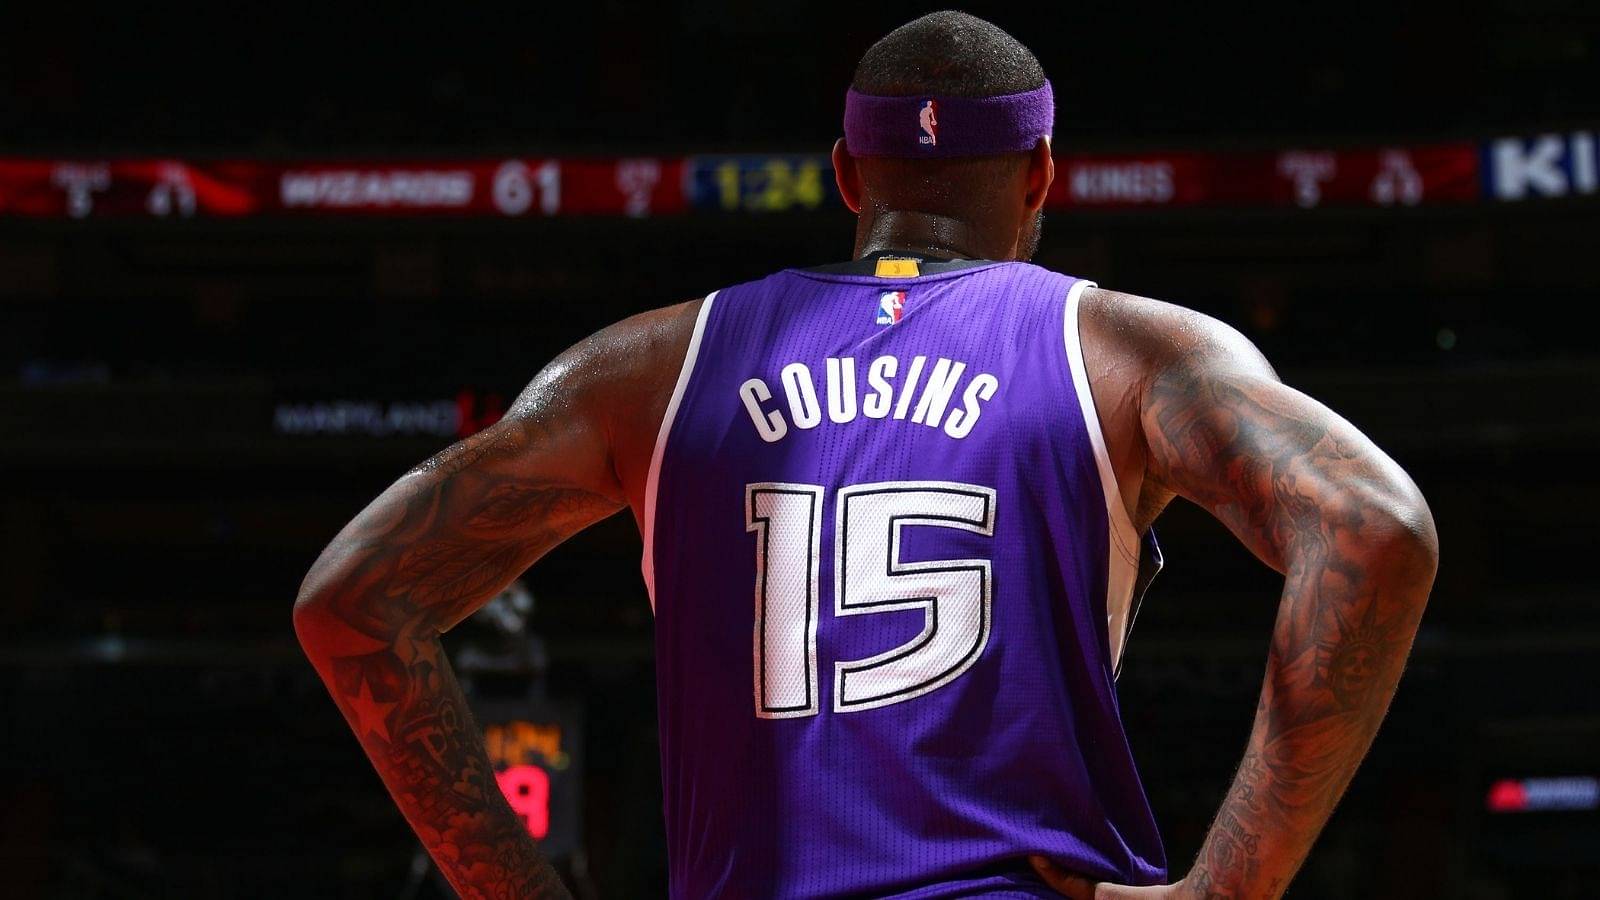 "I Could NOT Figure Tim Duncan Out": DeMarcus Cousins Speaks About Him Trying To Trash Talk The San Antonio Spurs Legend